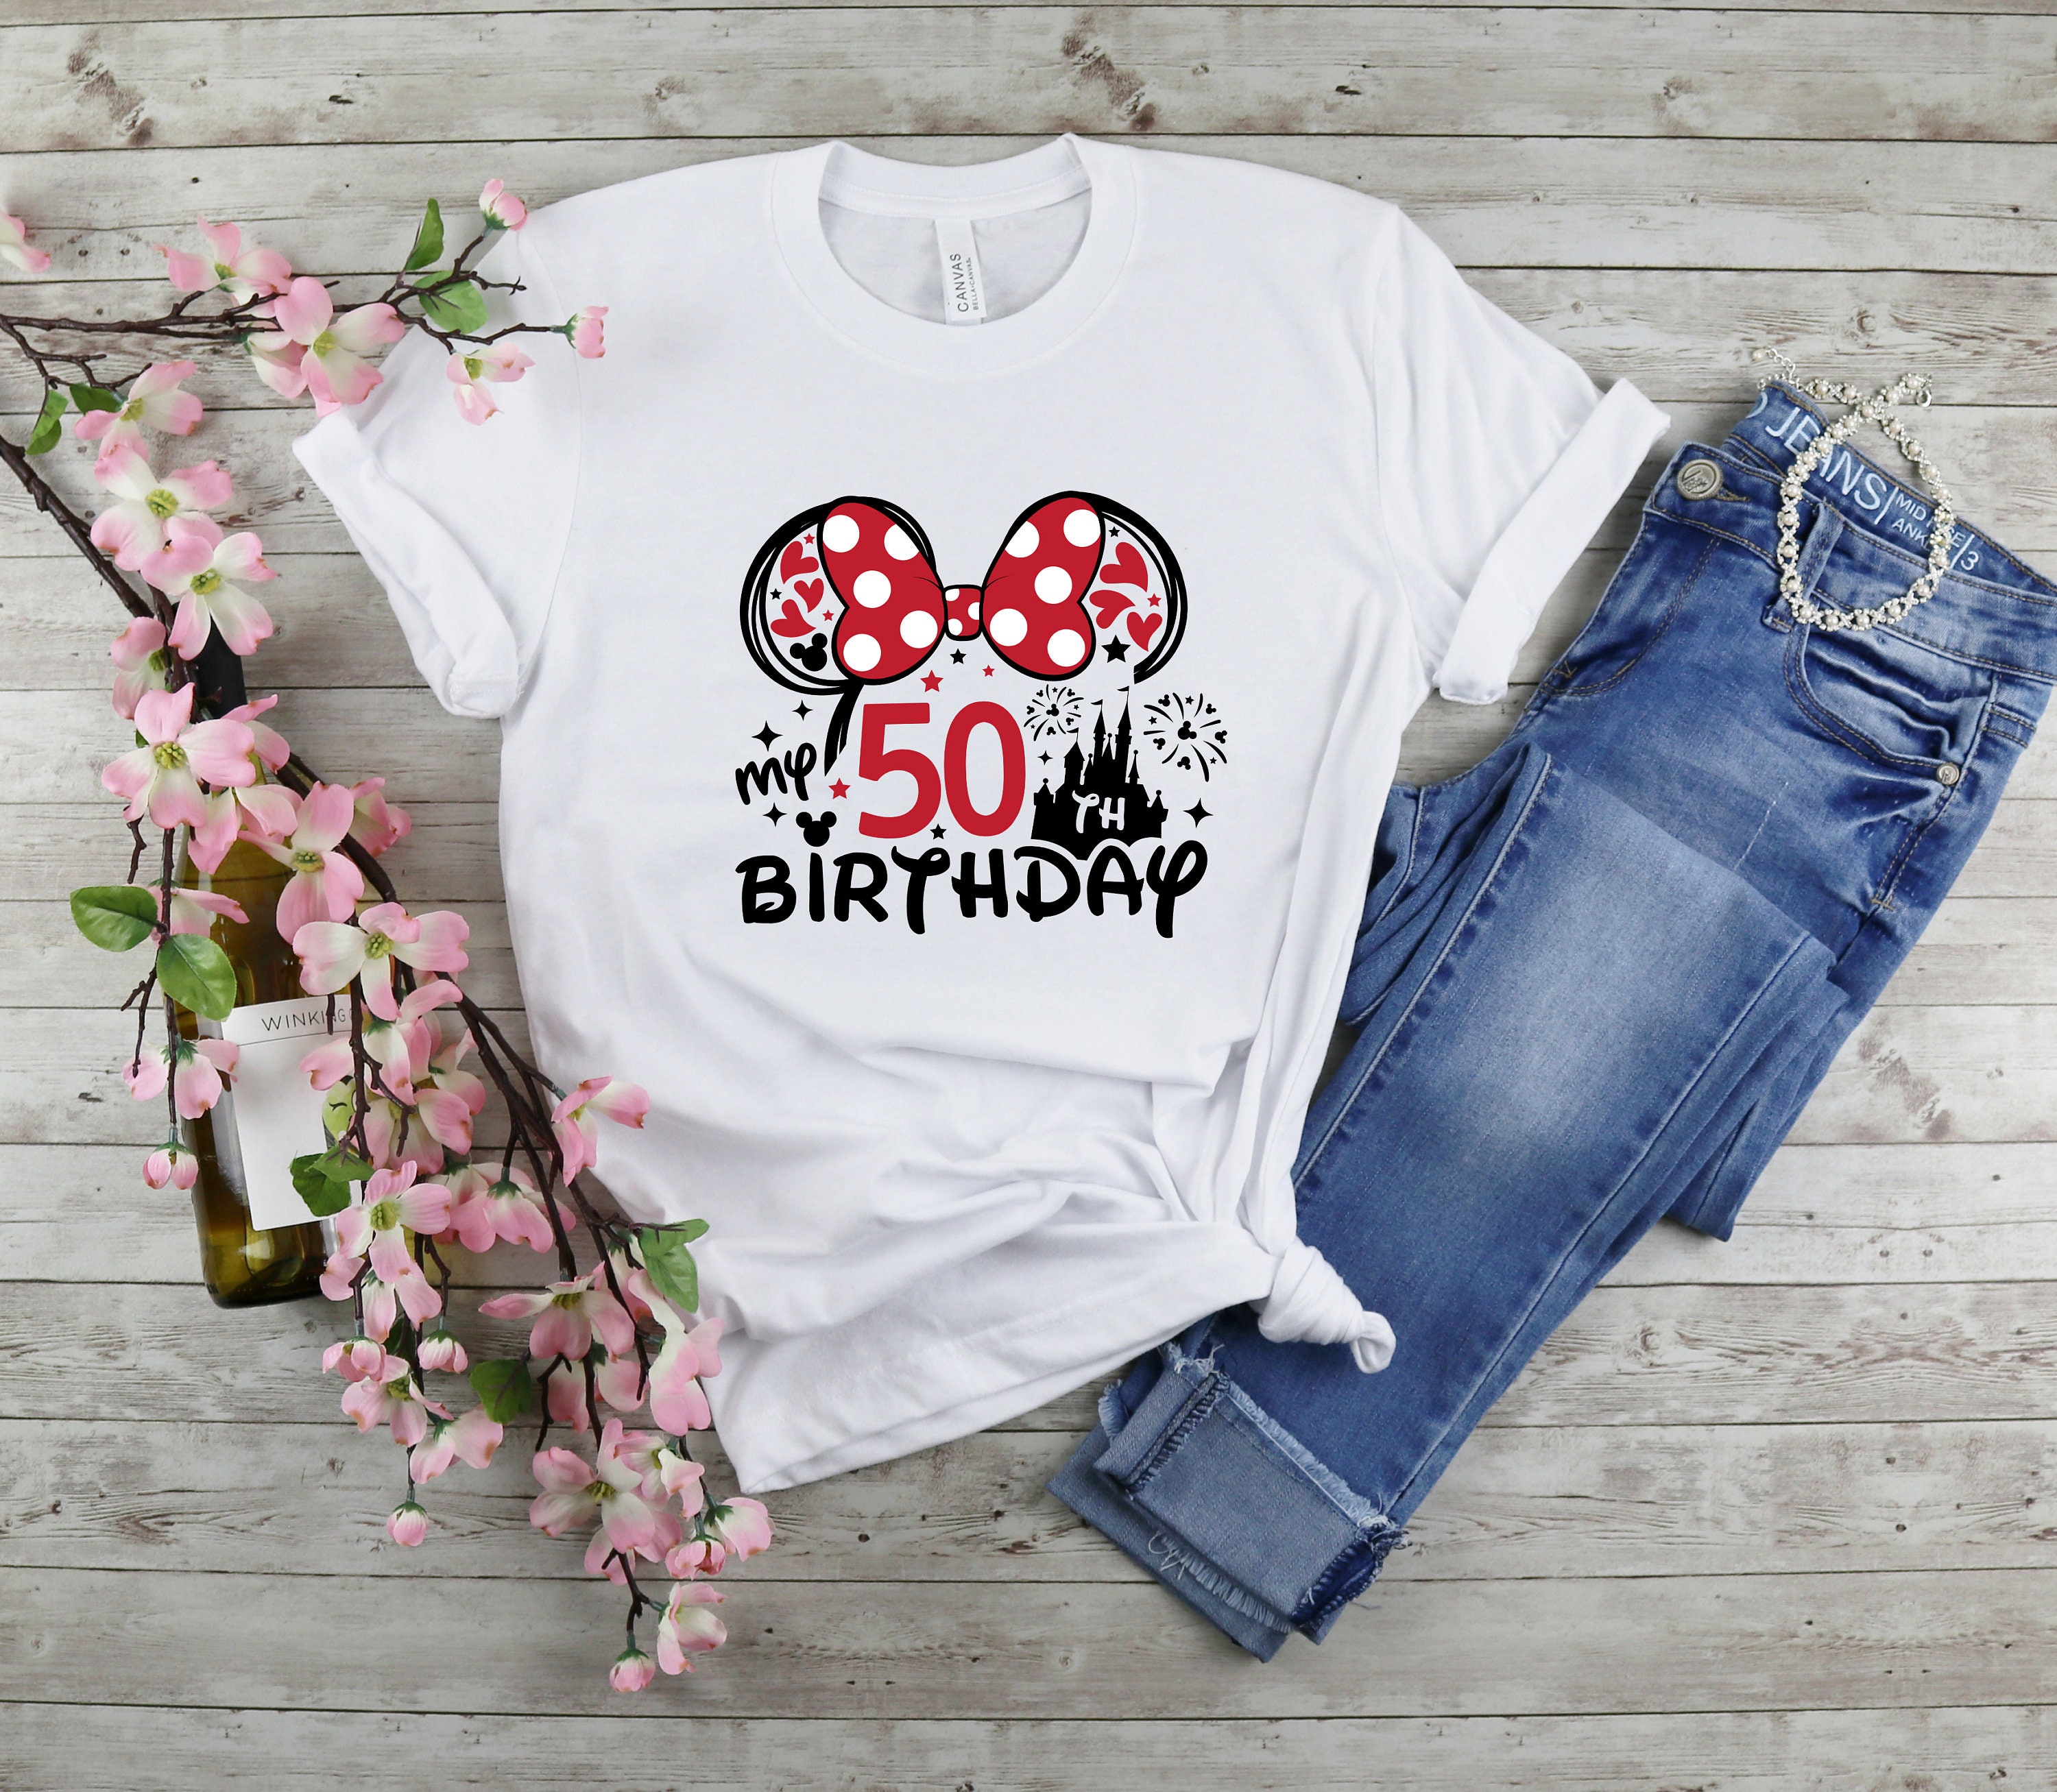 Discover 50th Birthday Shirt, Minnie 50 Years Old T-Shirt, Gift For 50th Birthday, 50th Birthday Shirt